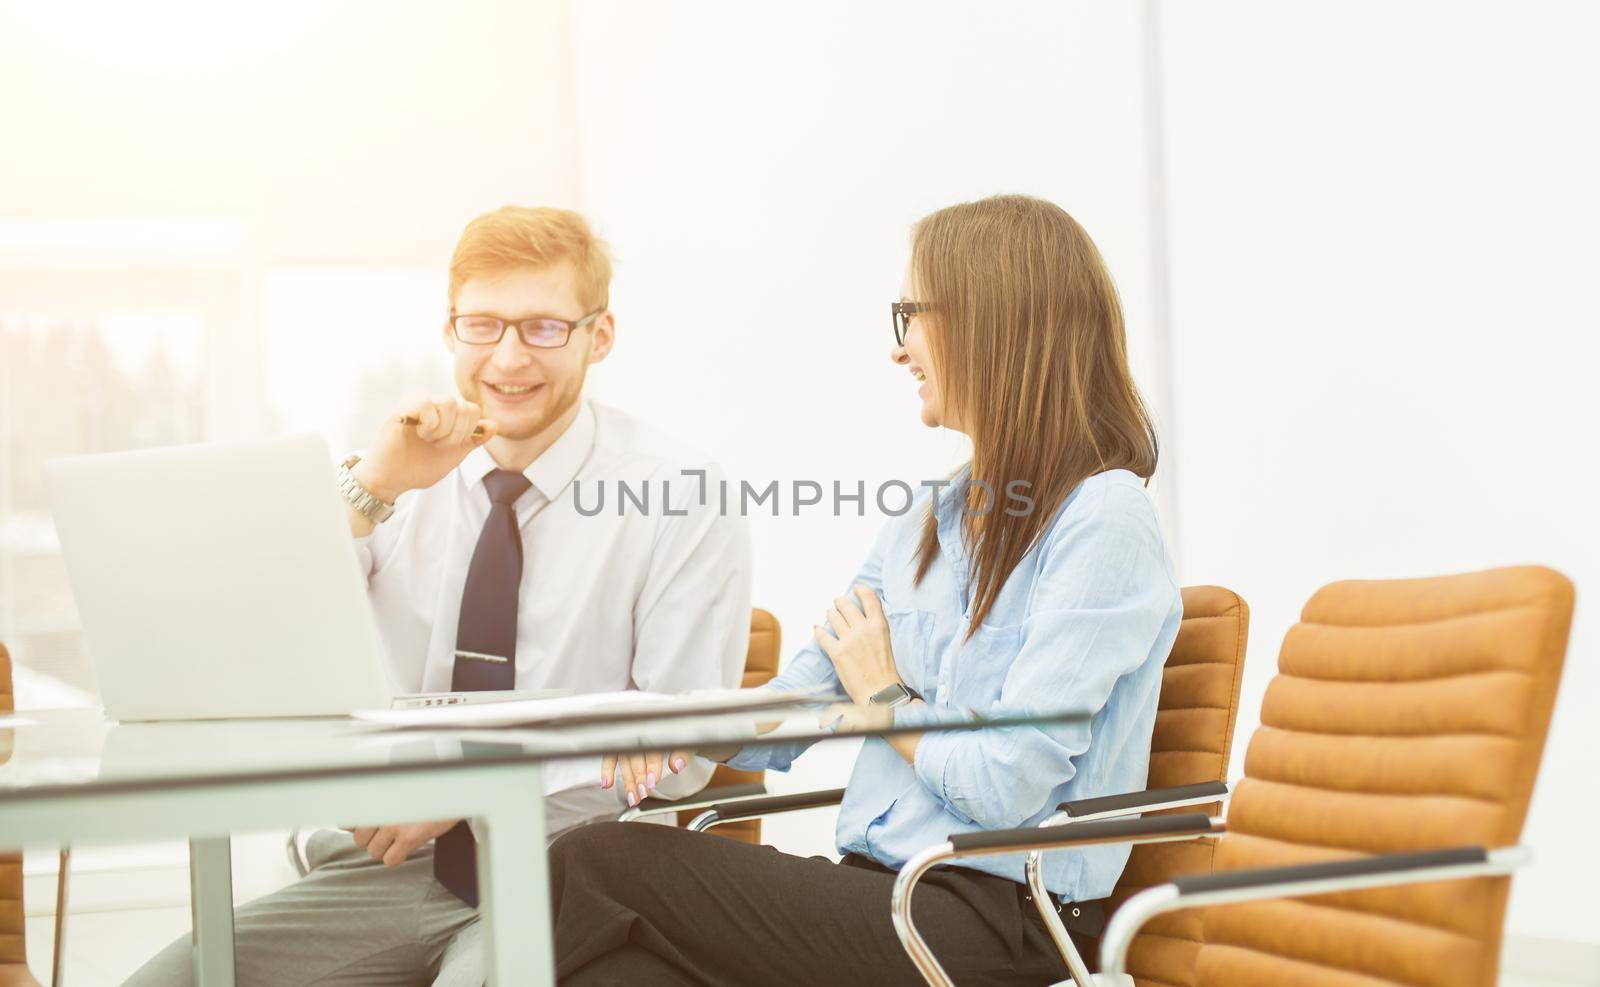 experienced staff of the company discuss the current problems at the Desk by SmartPhotoLab